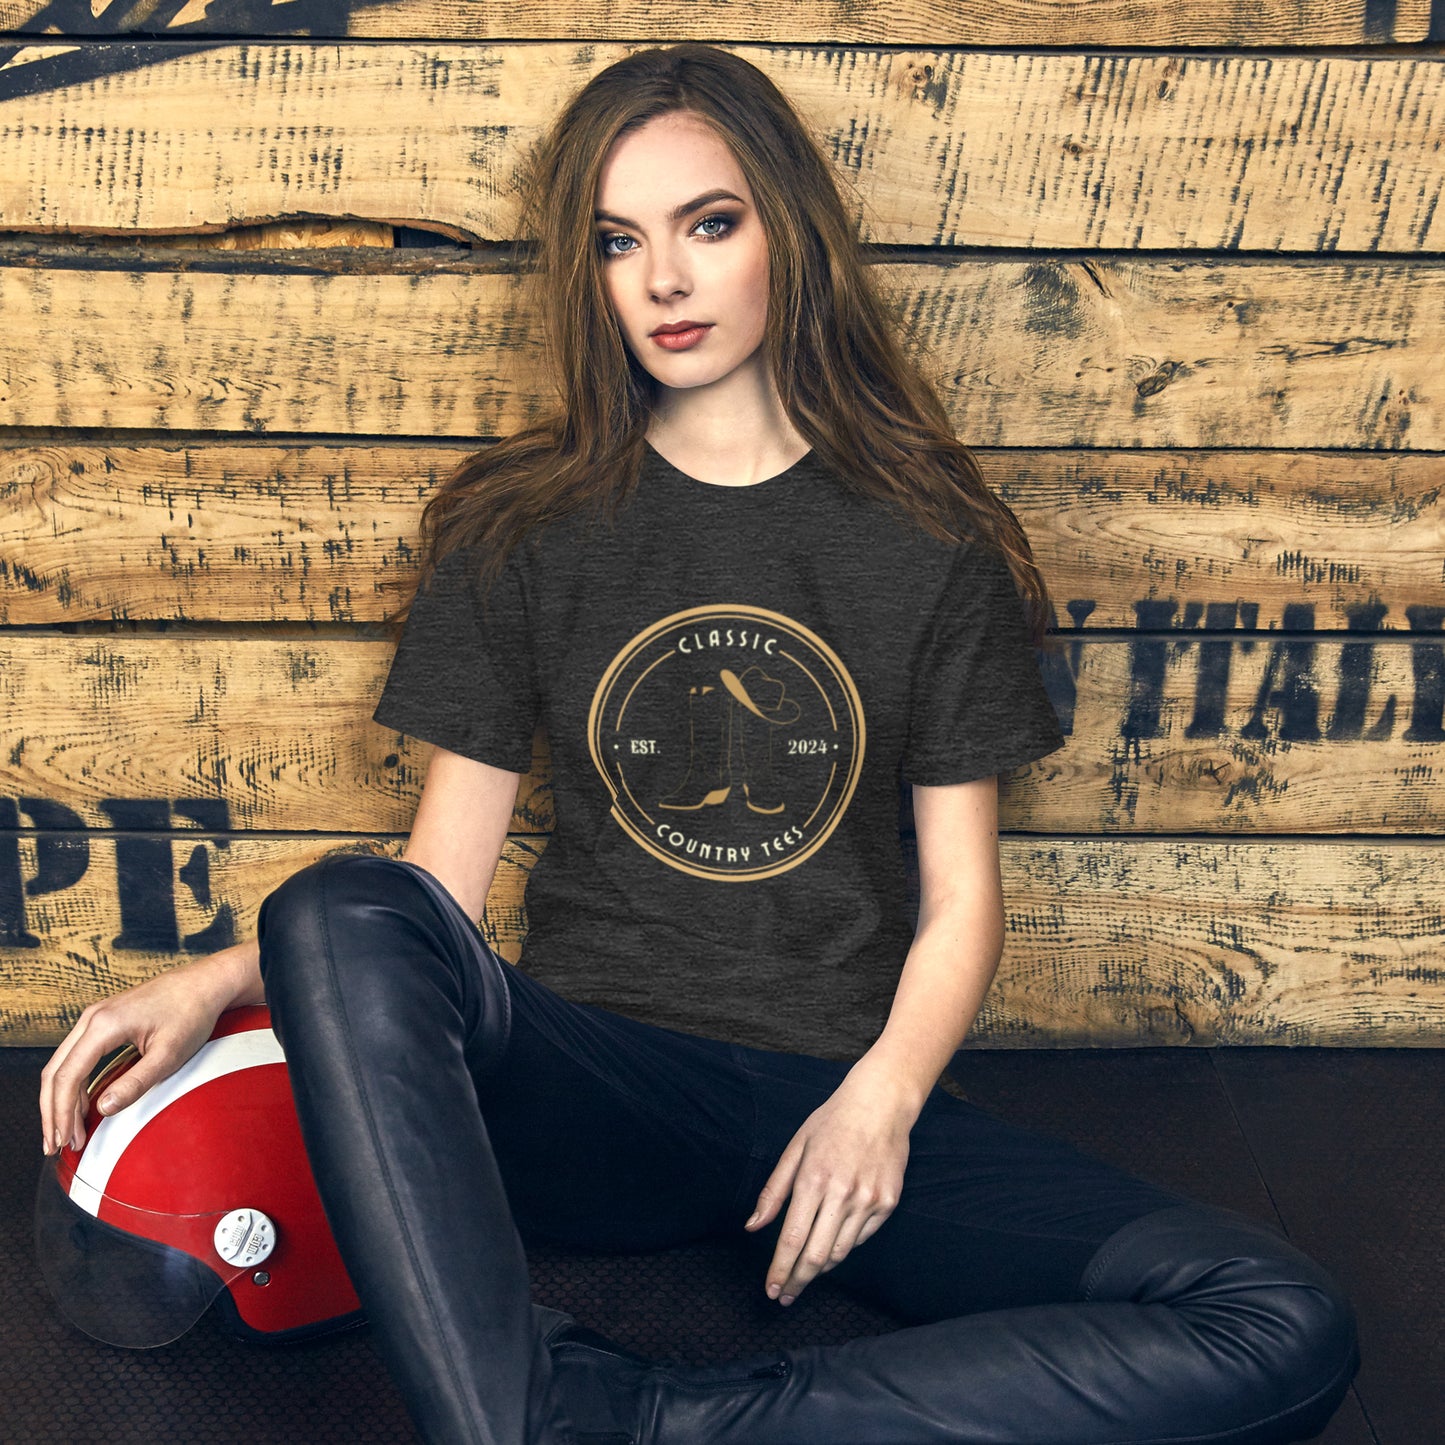 Classic Country Tees - Get Your Twang On with Classic Country Tees - The Ultimate Unisex T-Shirt for True Country Souls! - Classic Country Tees